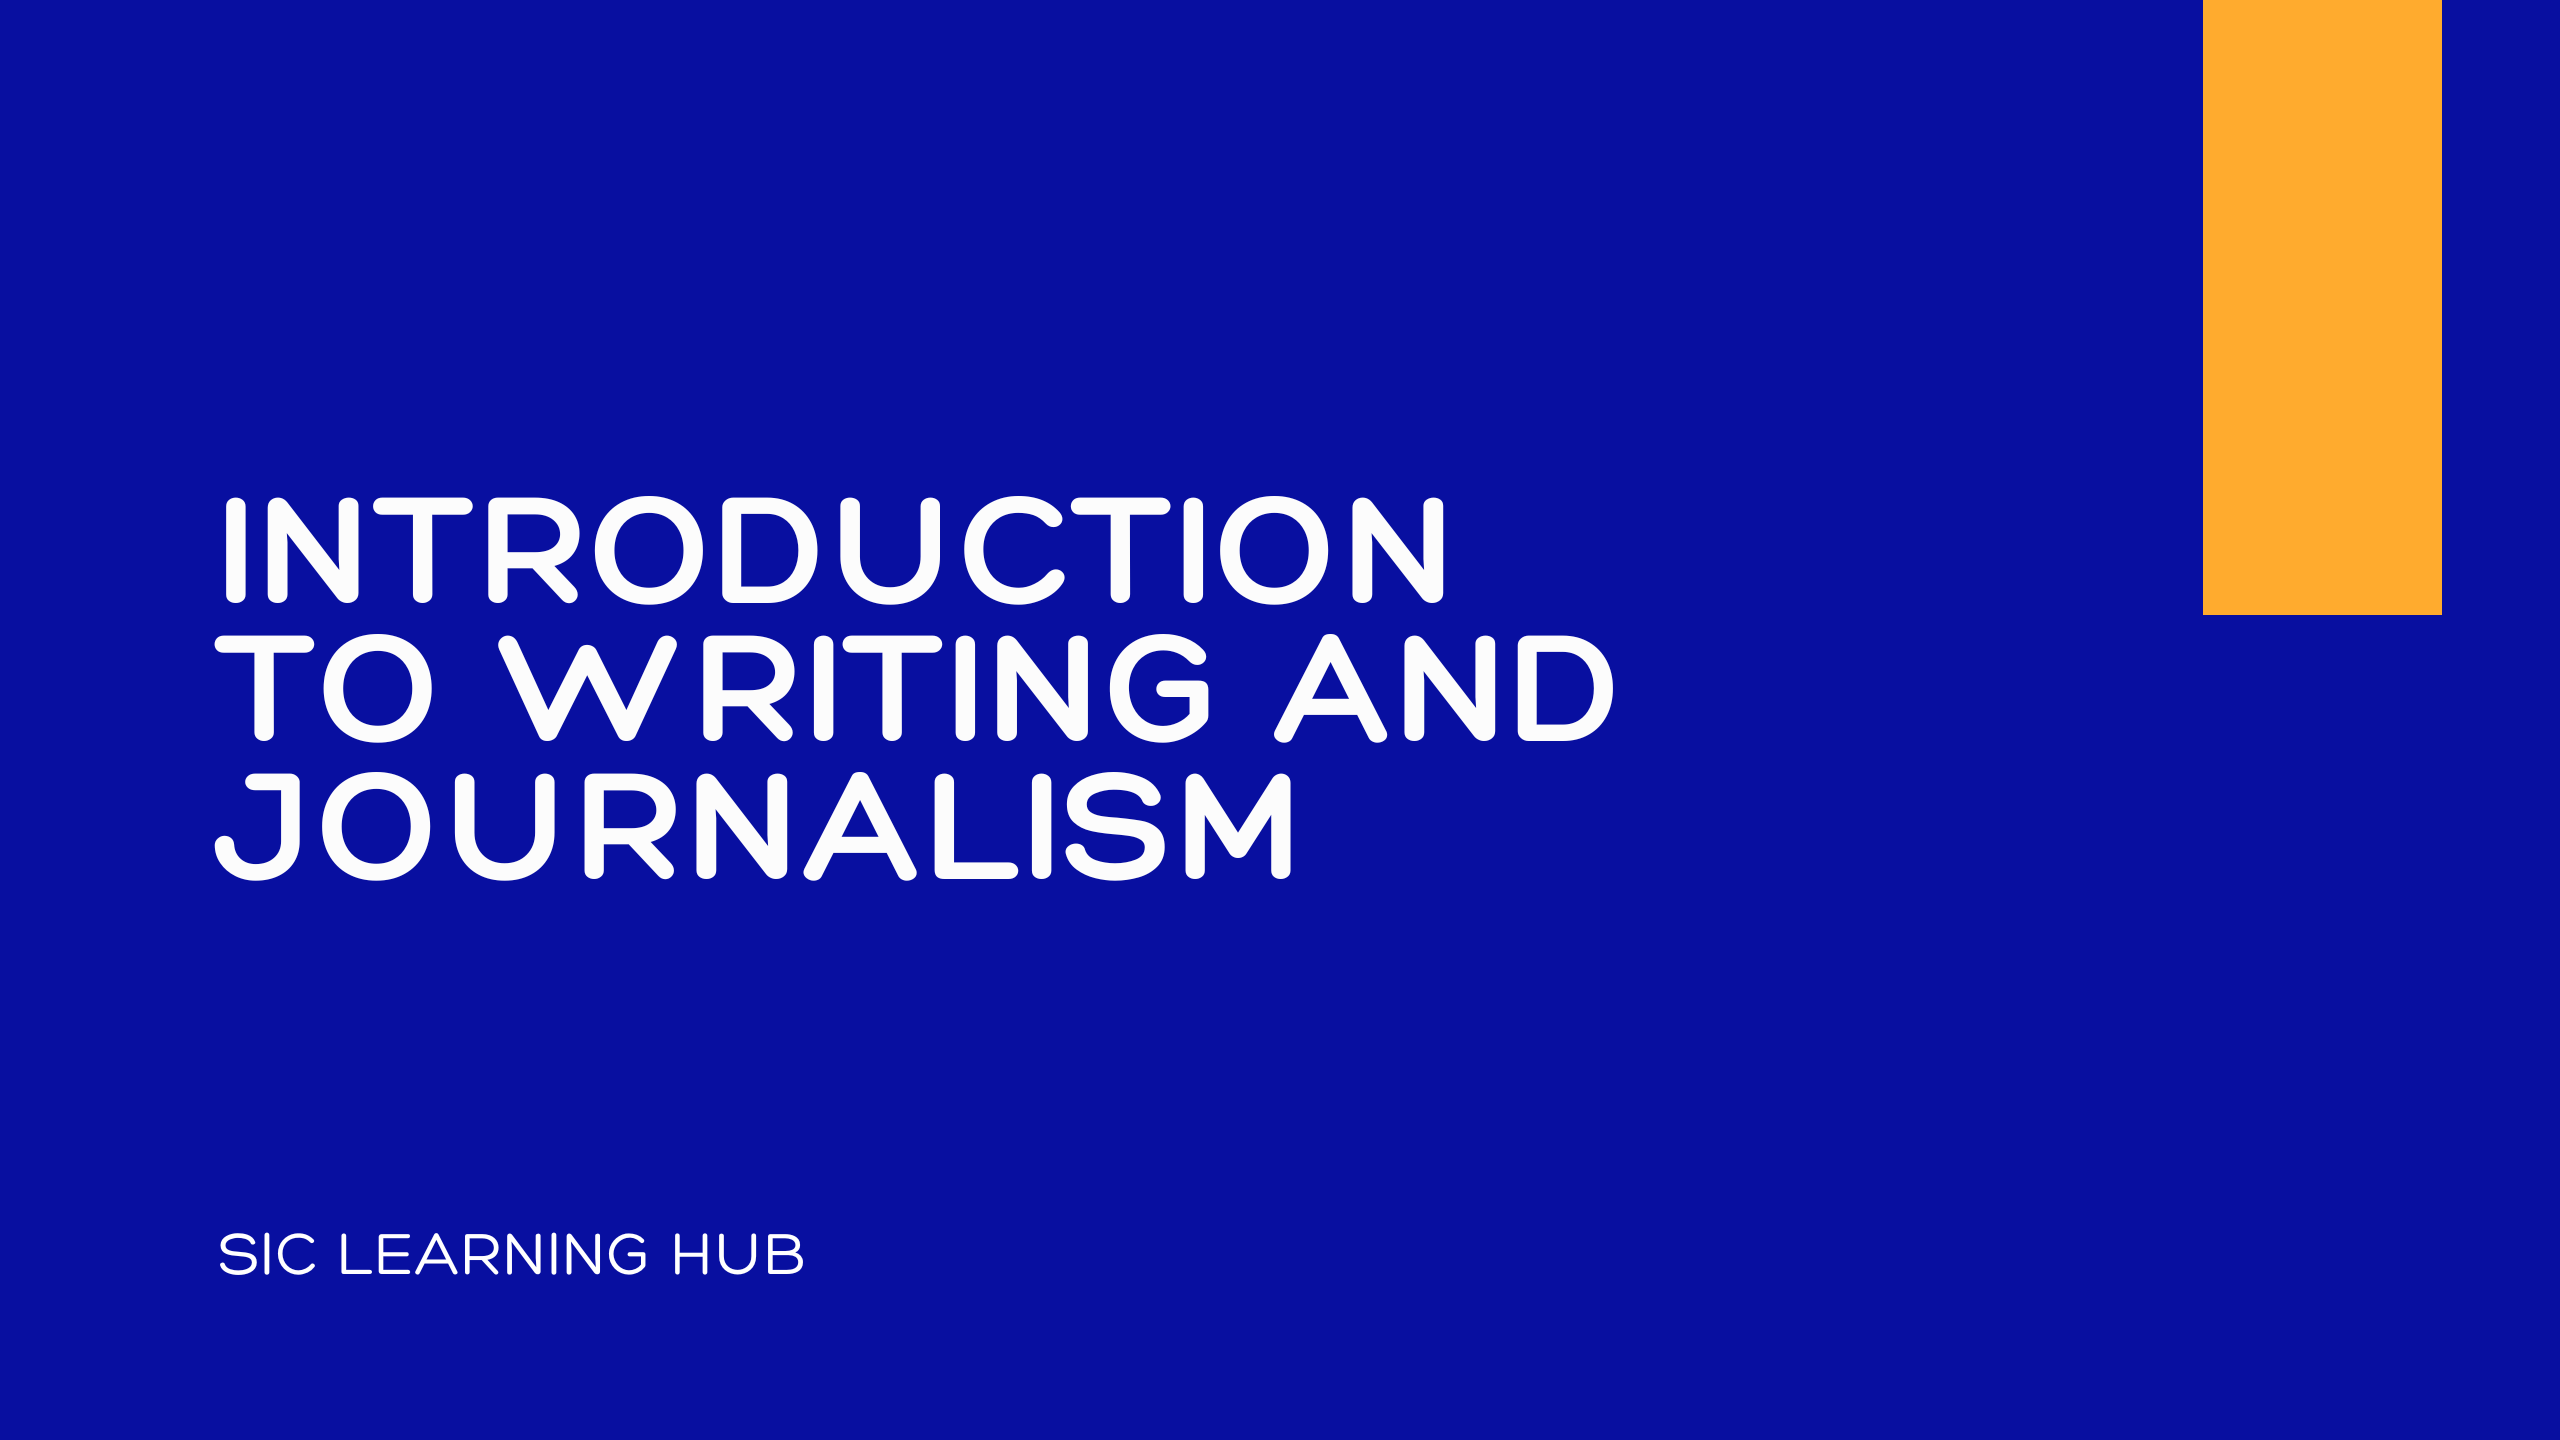 An Introduction to Writing and Journalism